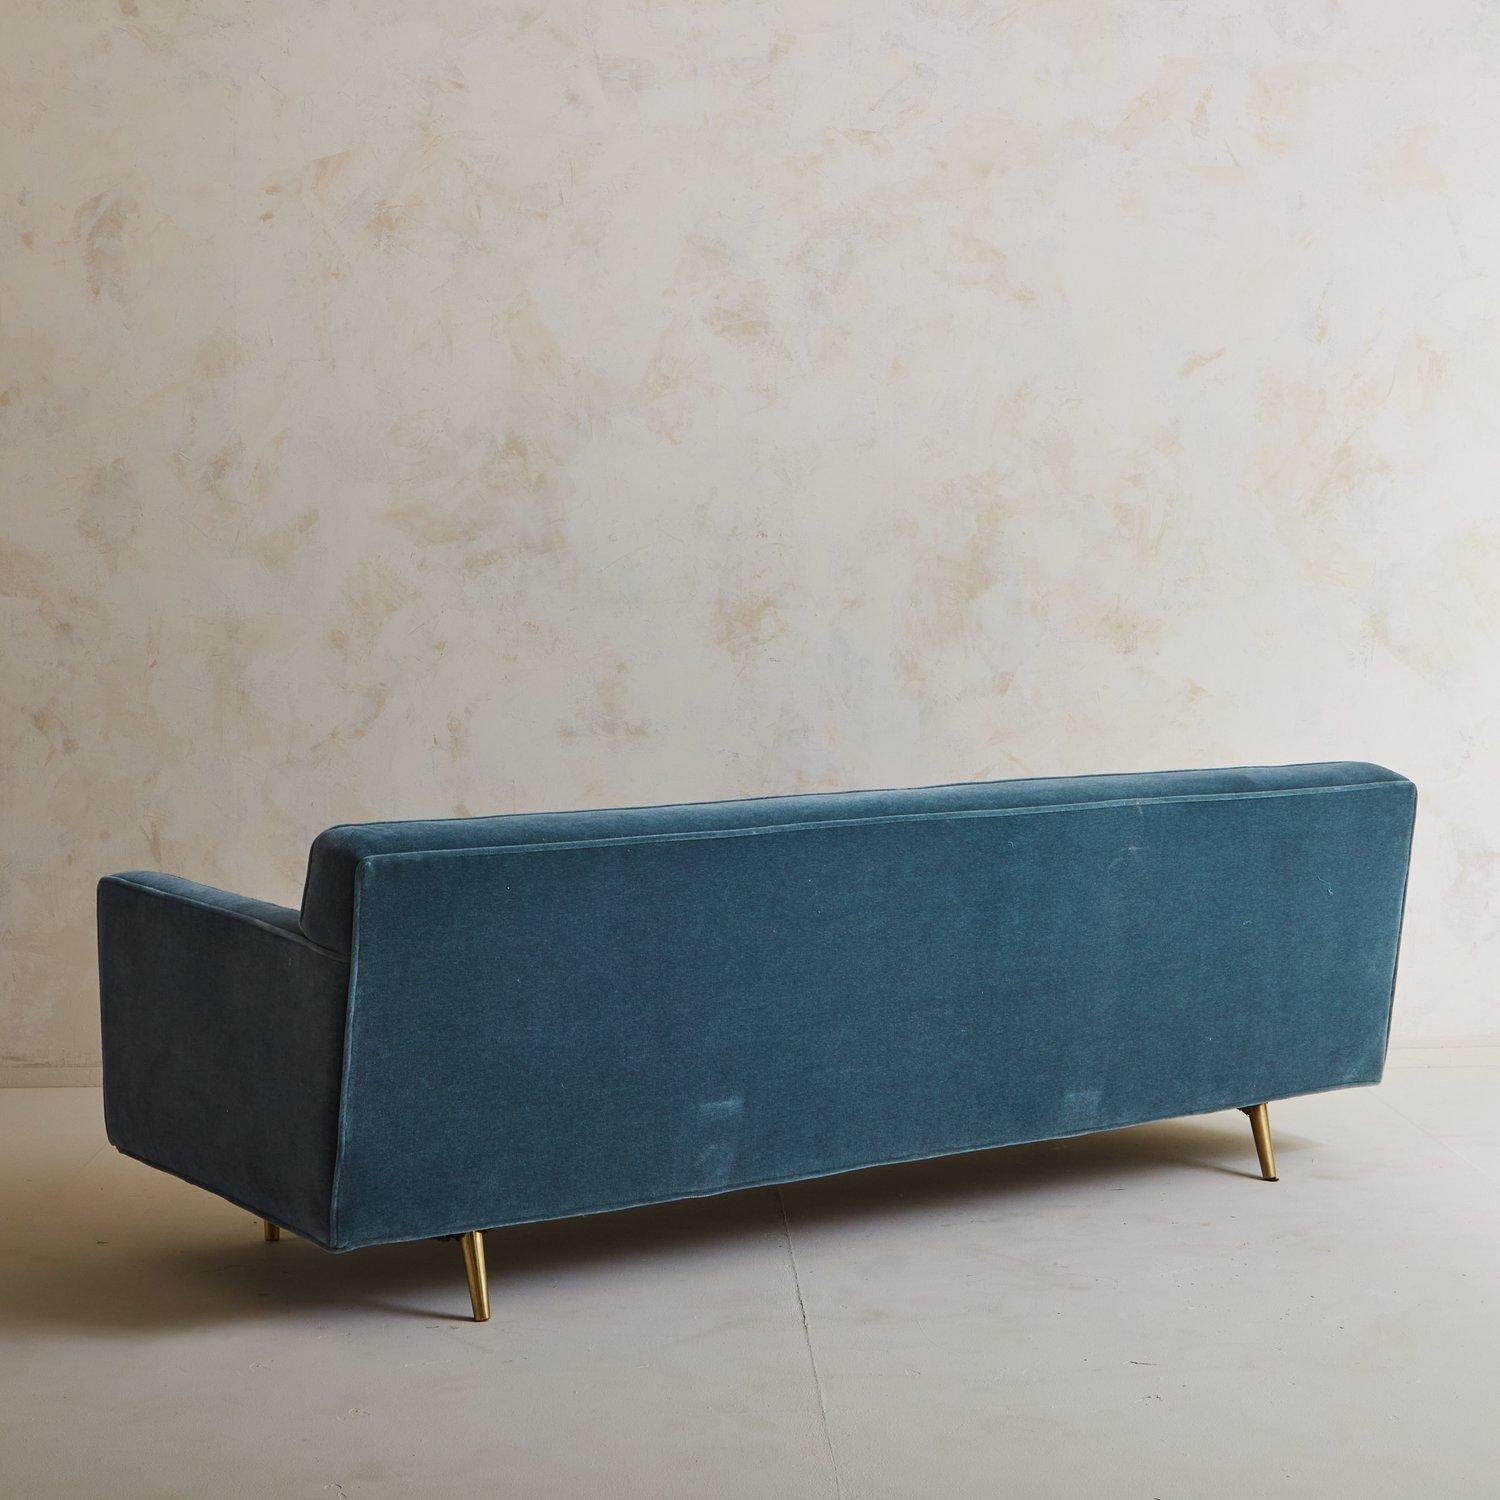 American Tufted Sofa in Blue Mohair Attributed to Edward Wormley for Dunbar, USA 1950s For Sale